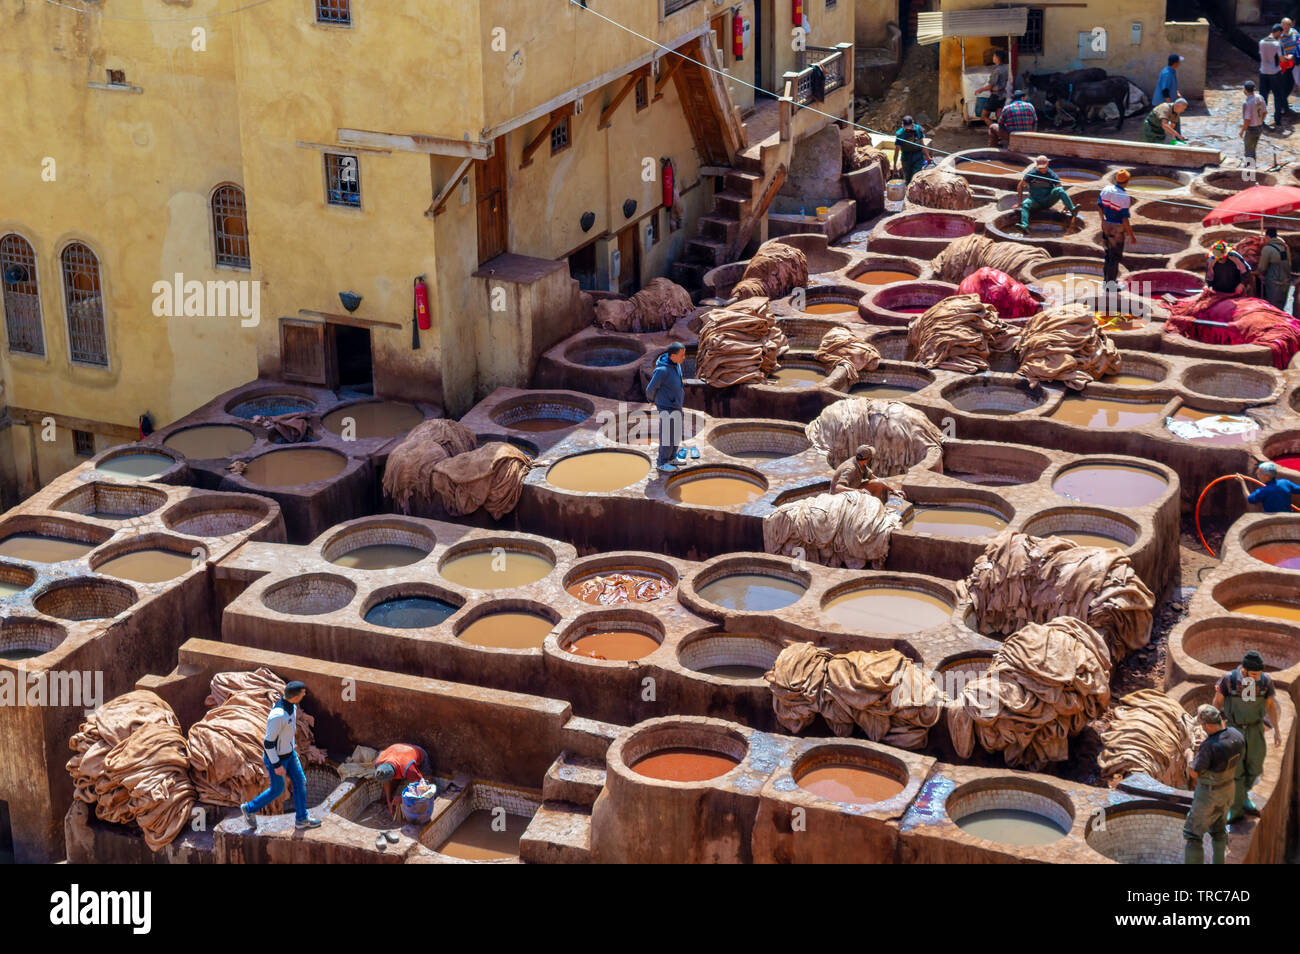 Aerial view of the colorful leather tanneries of Fez, Morocco Stock Photo